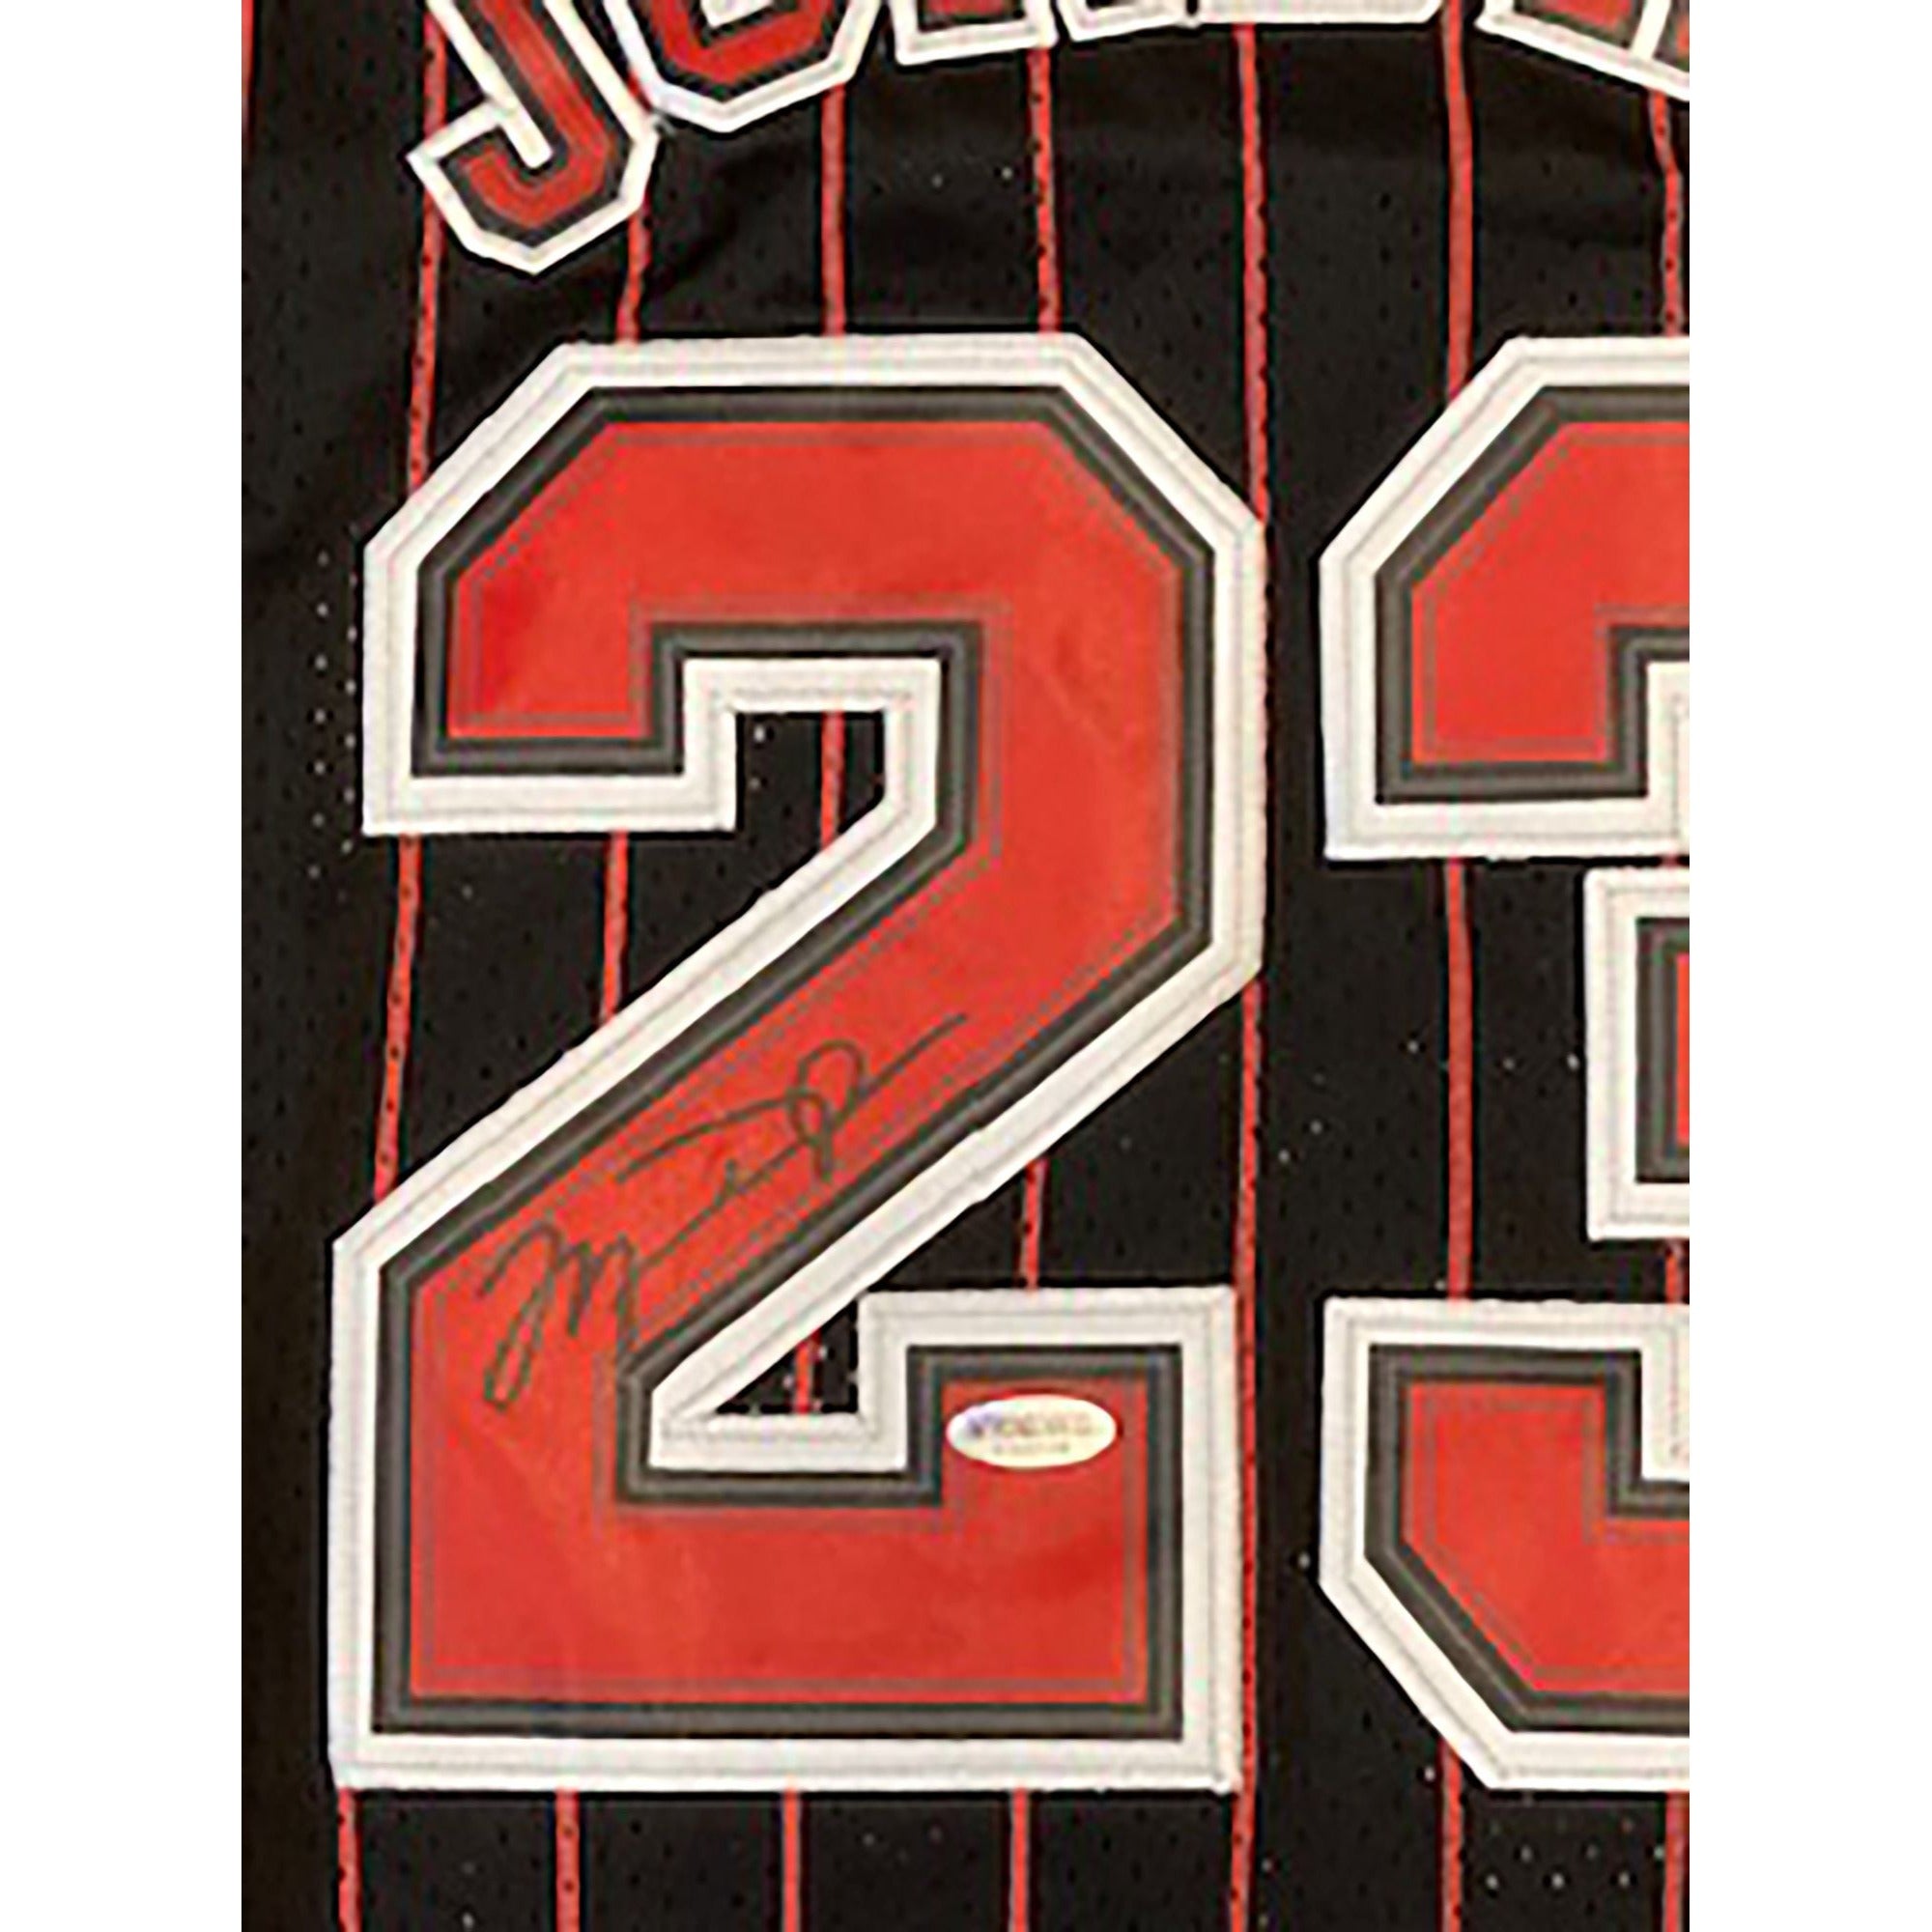 Michael Jordan black jersey signed with proof